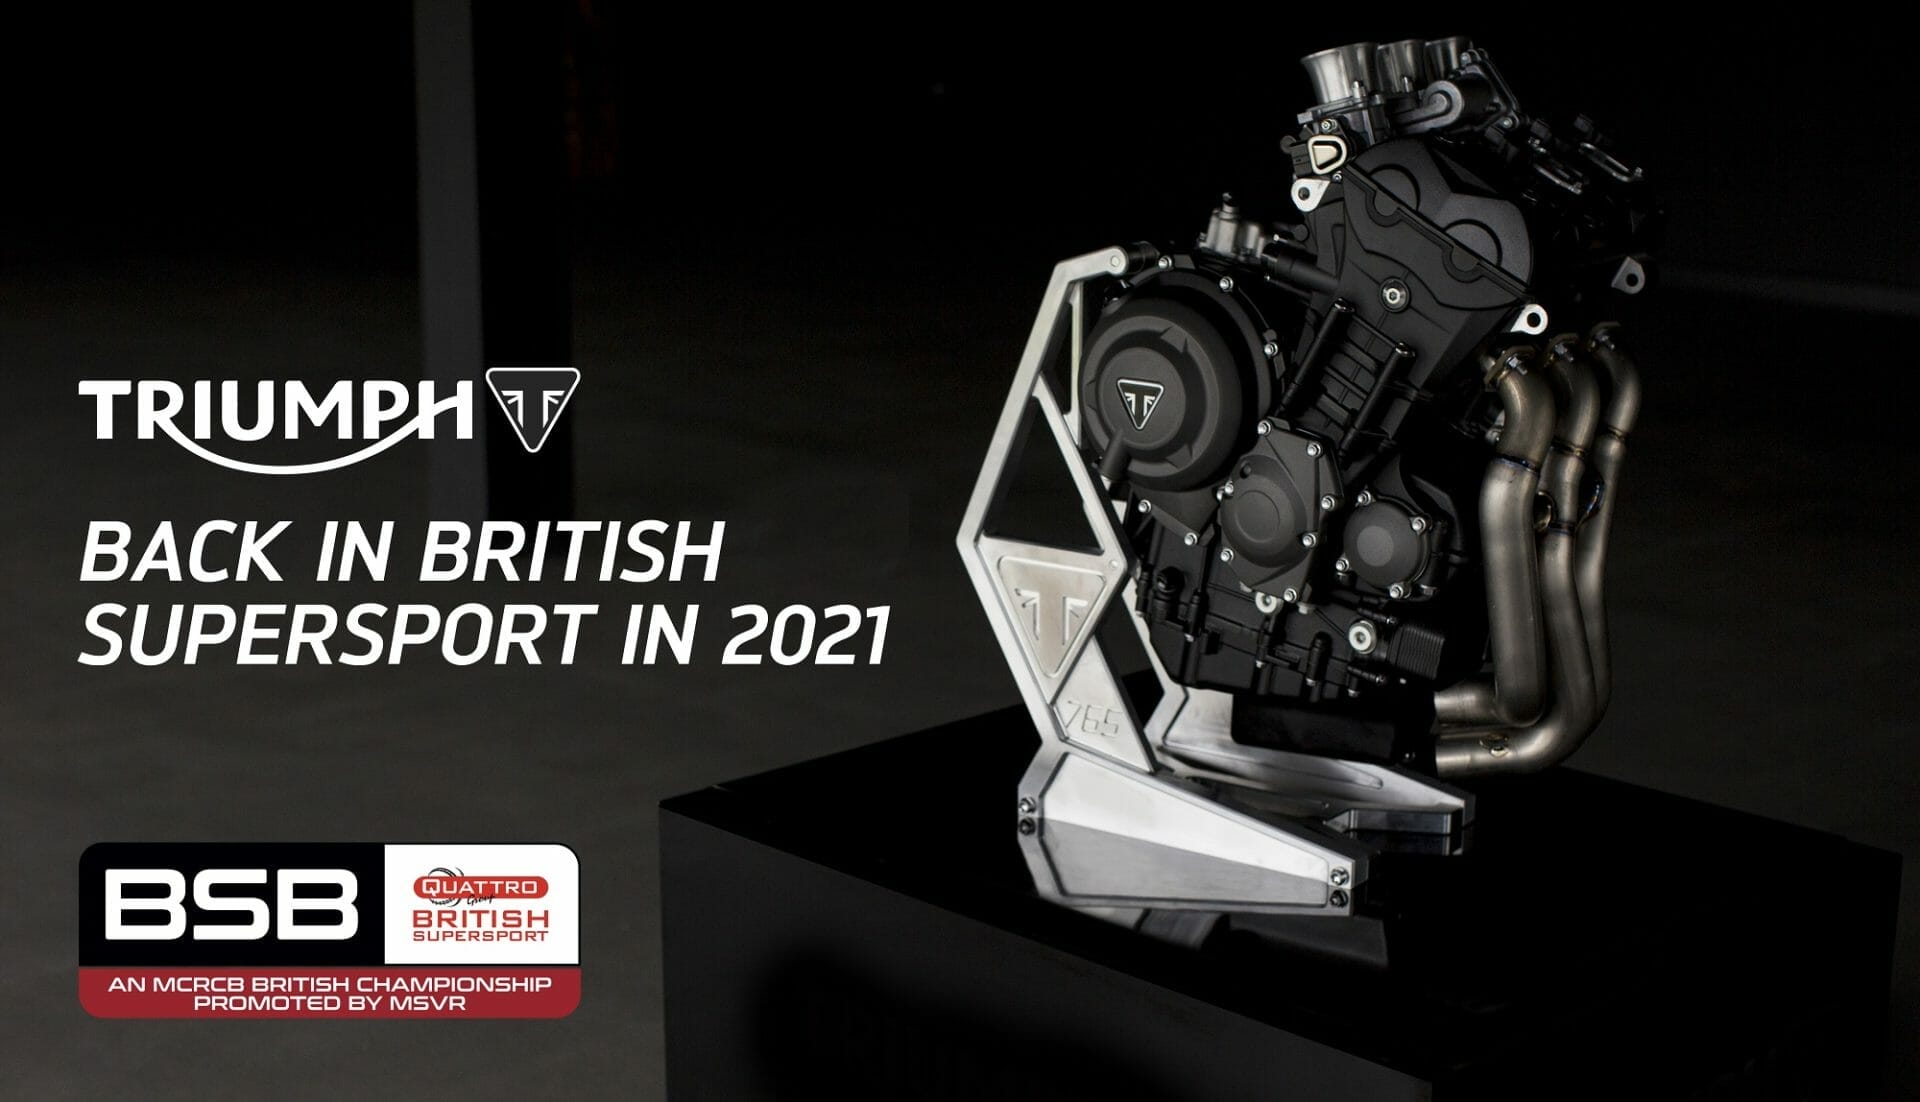 Triumph in the BSB 2021
- also in the MOTORCYCLES.NEWS APP